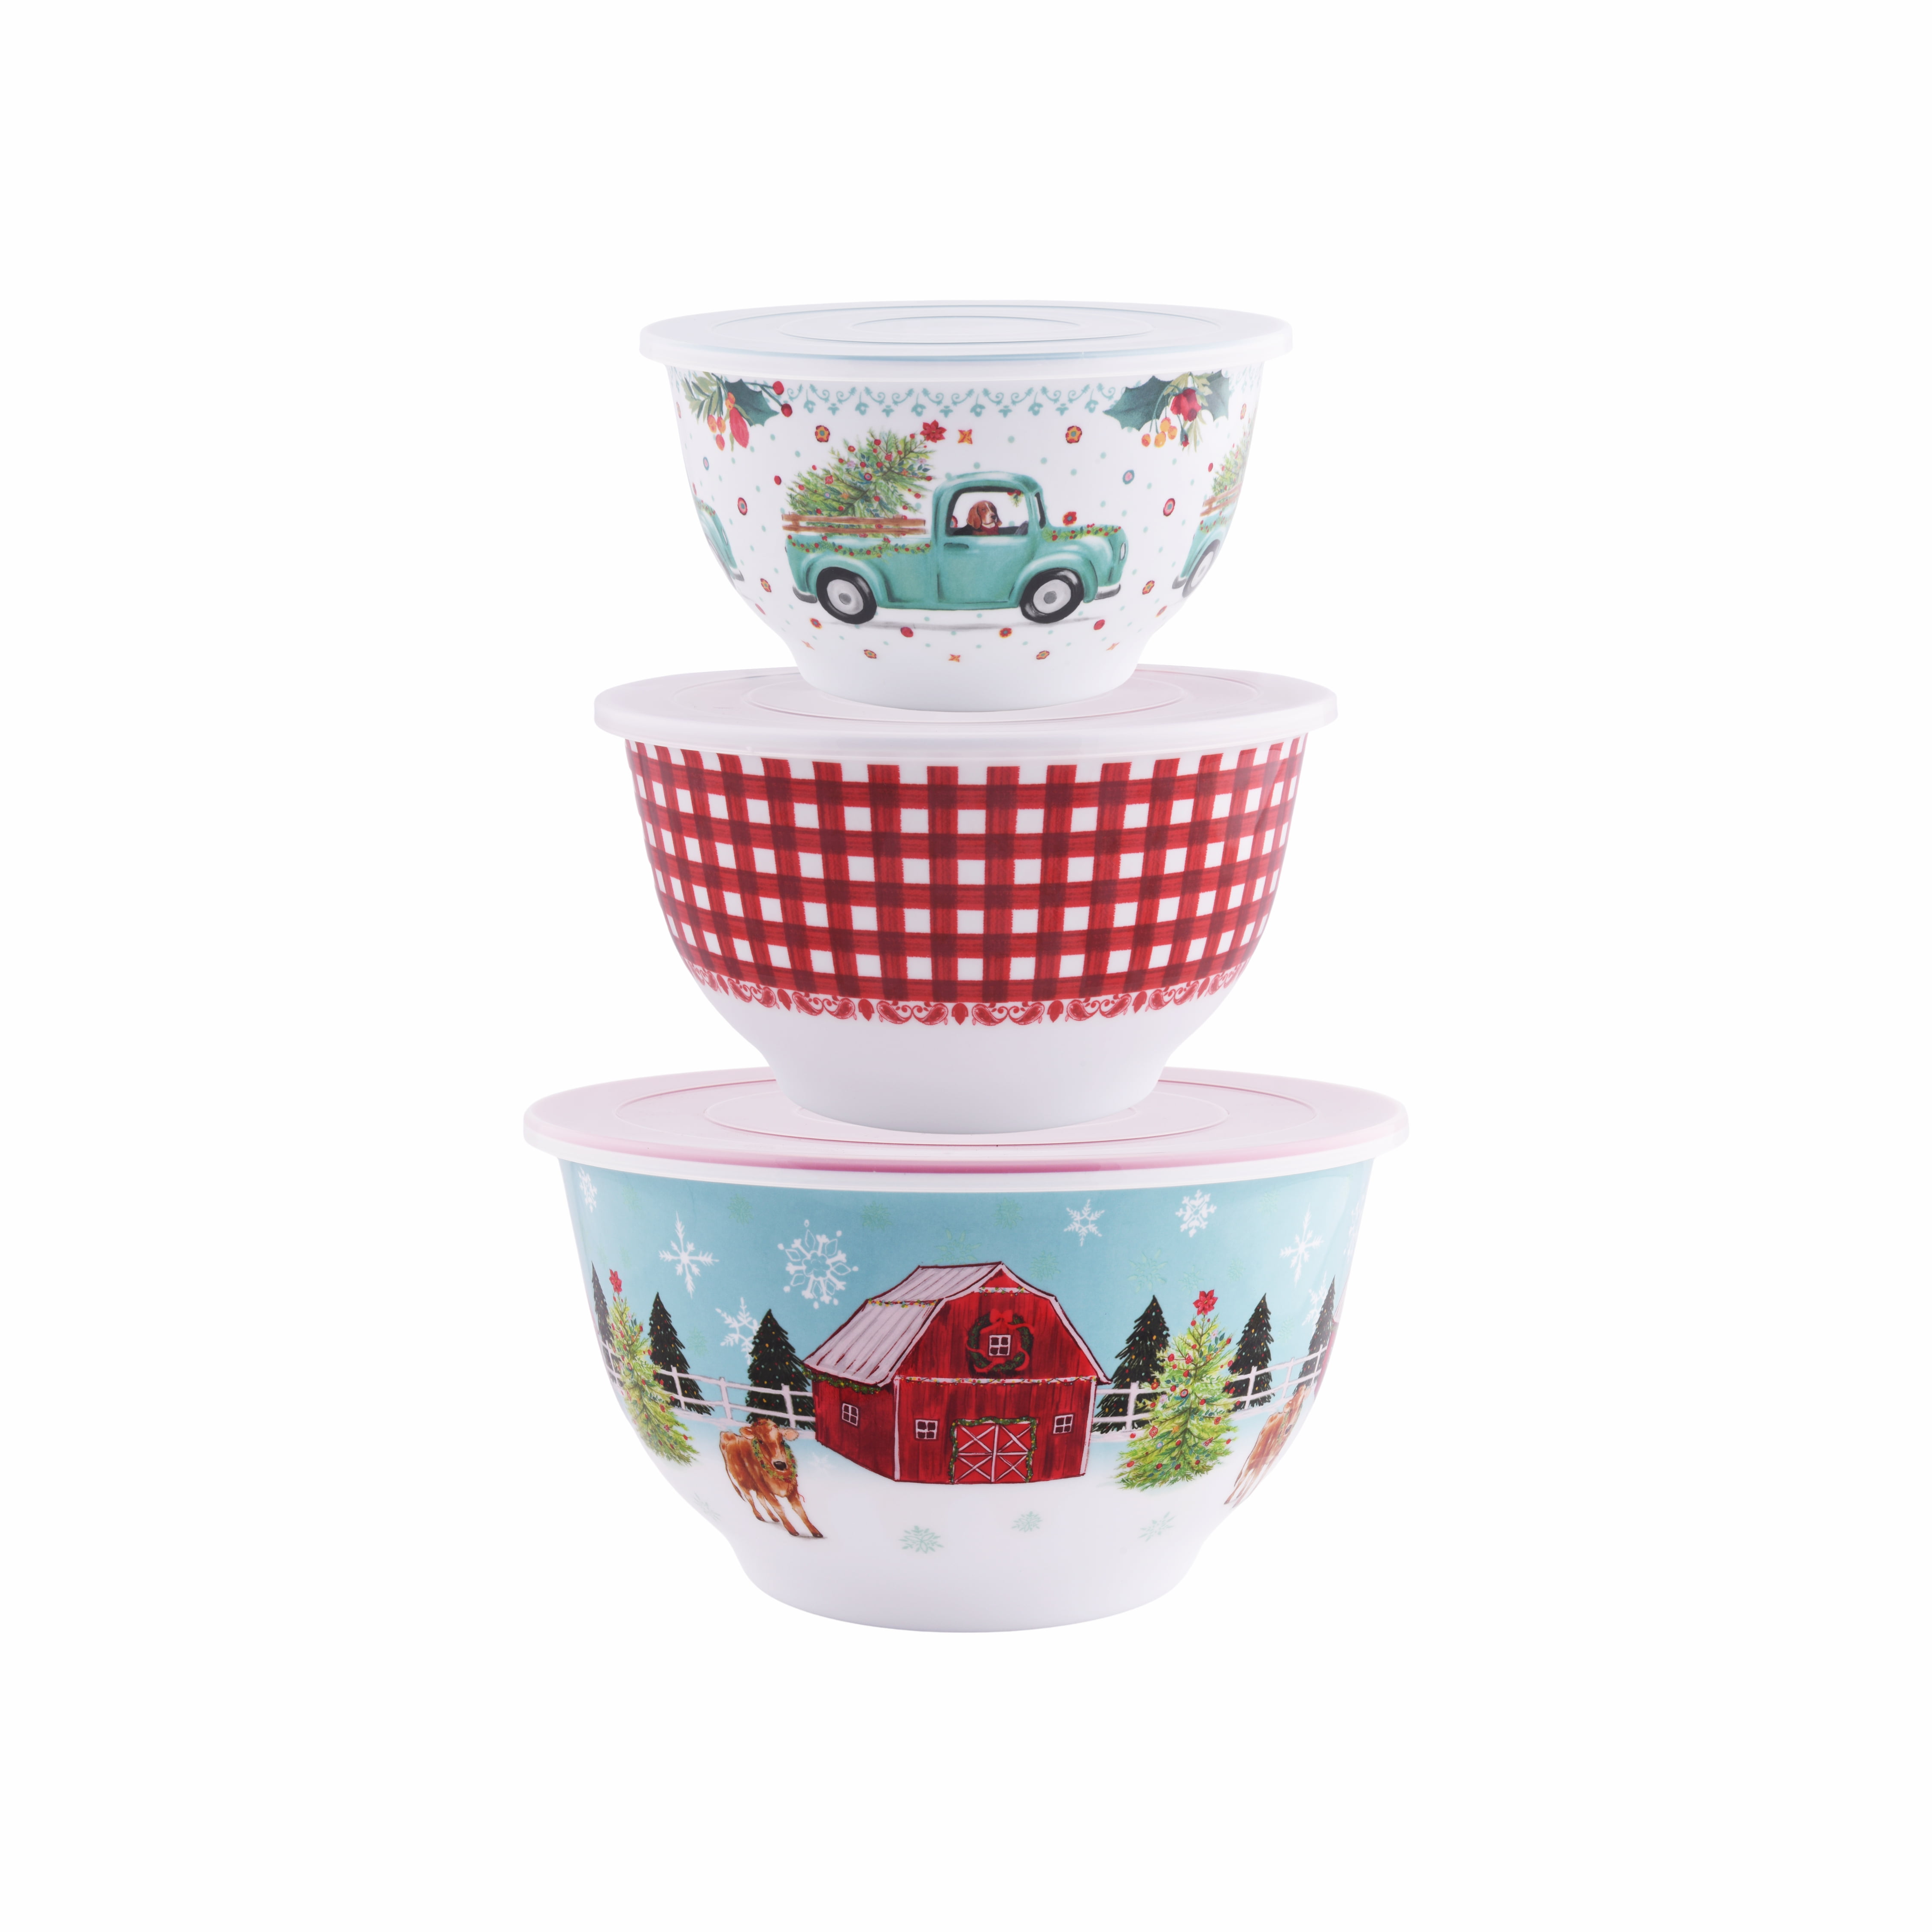 The Pioneer Woman 6-Piece Melamine Cheerful Rose Serving Bowl Set 